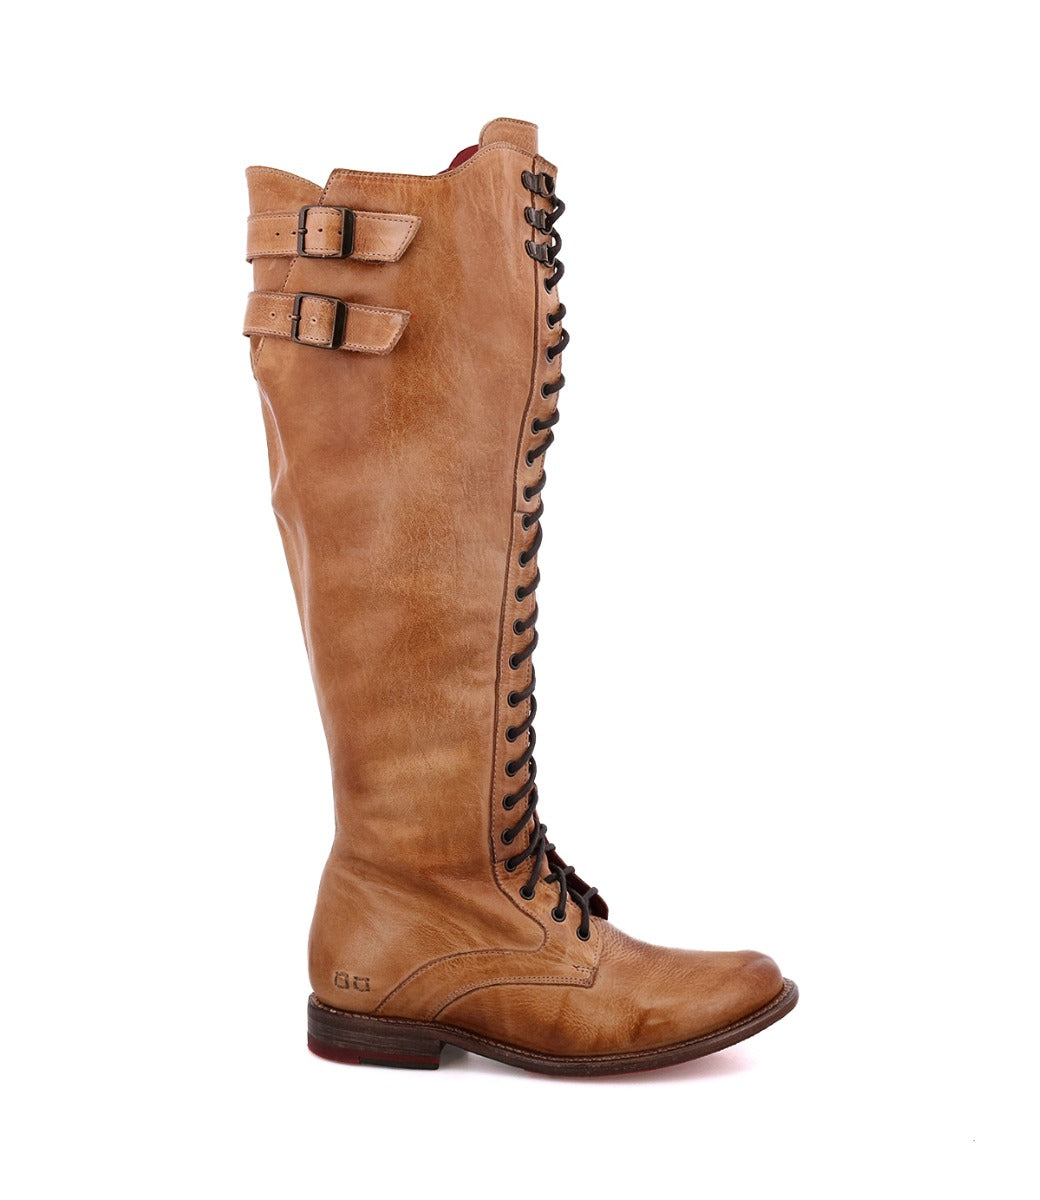 A women's Della leather boot with buckles and laces by Bed Stu.